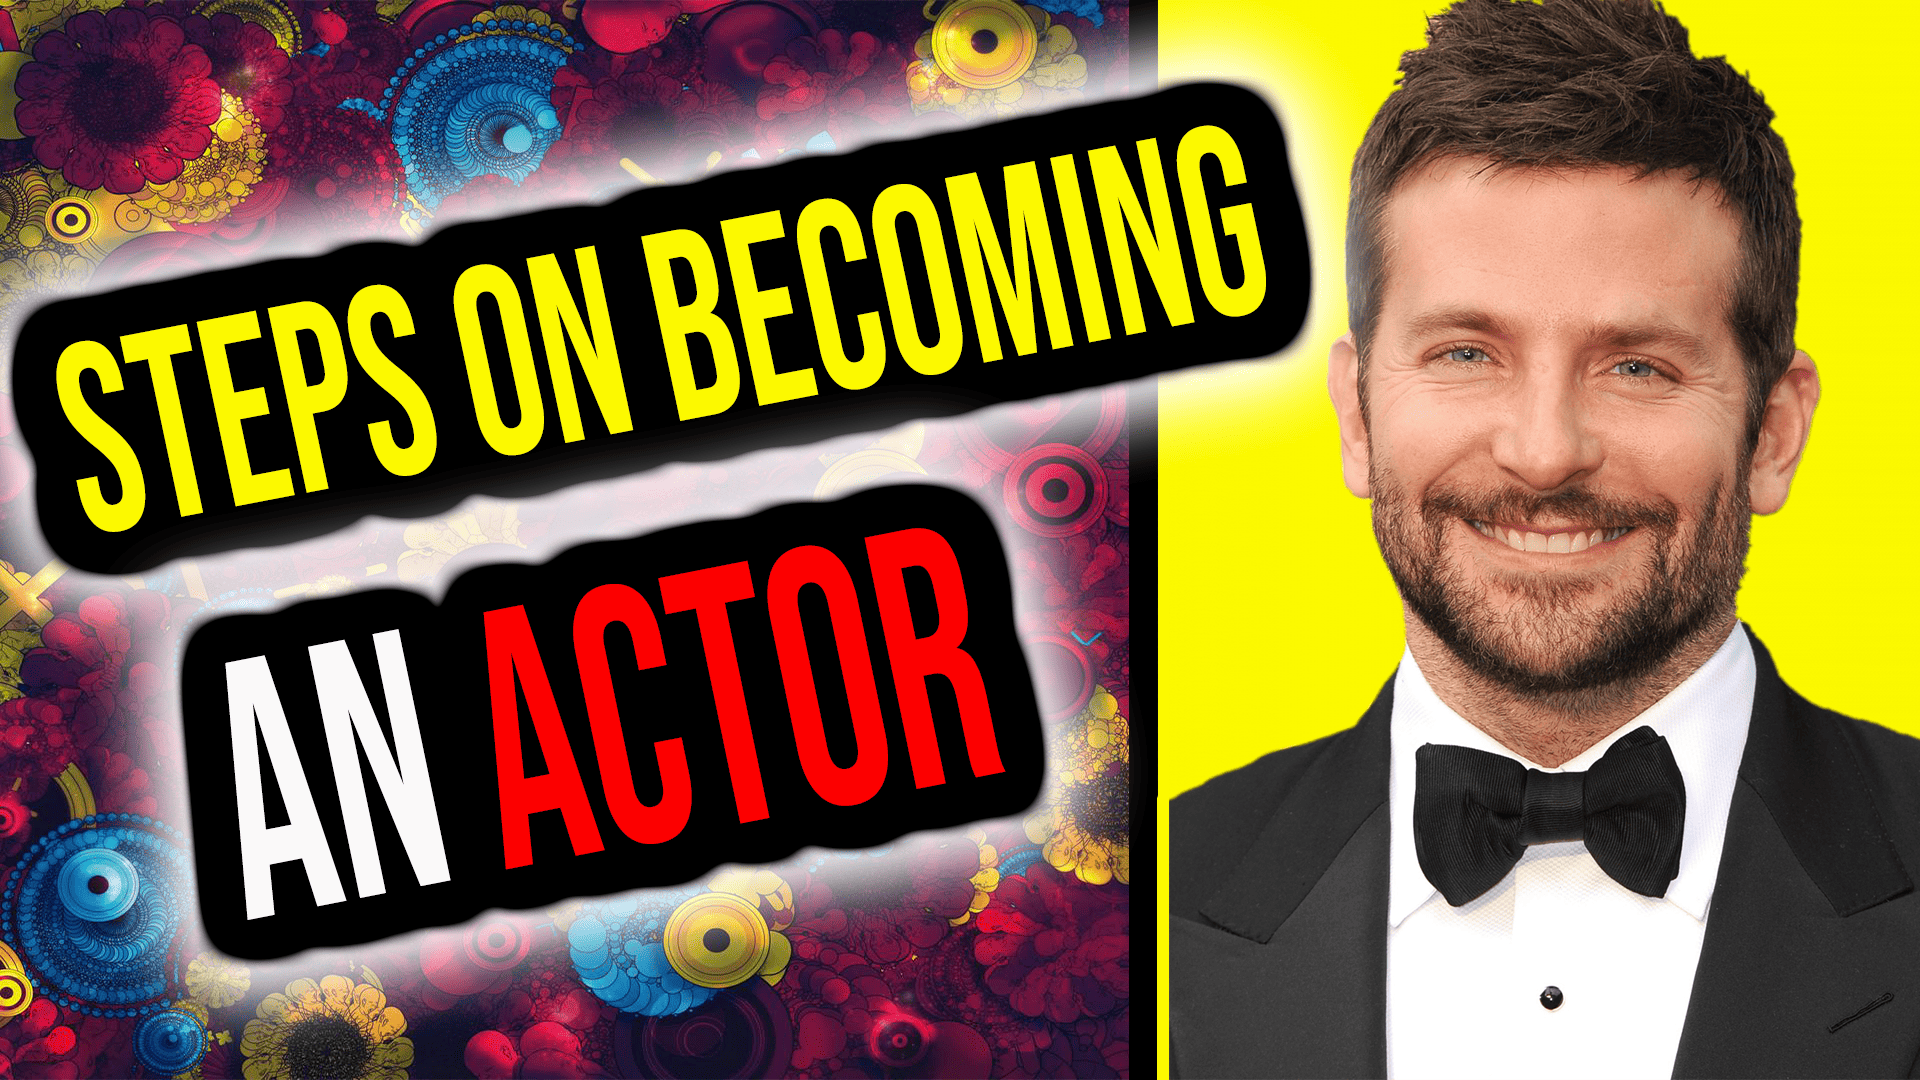 Steps on Becoming an Actor